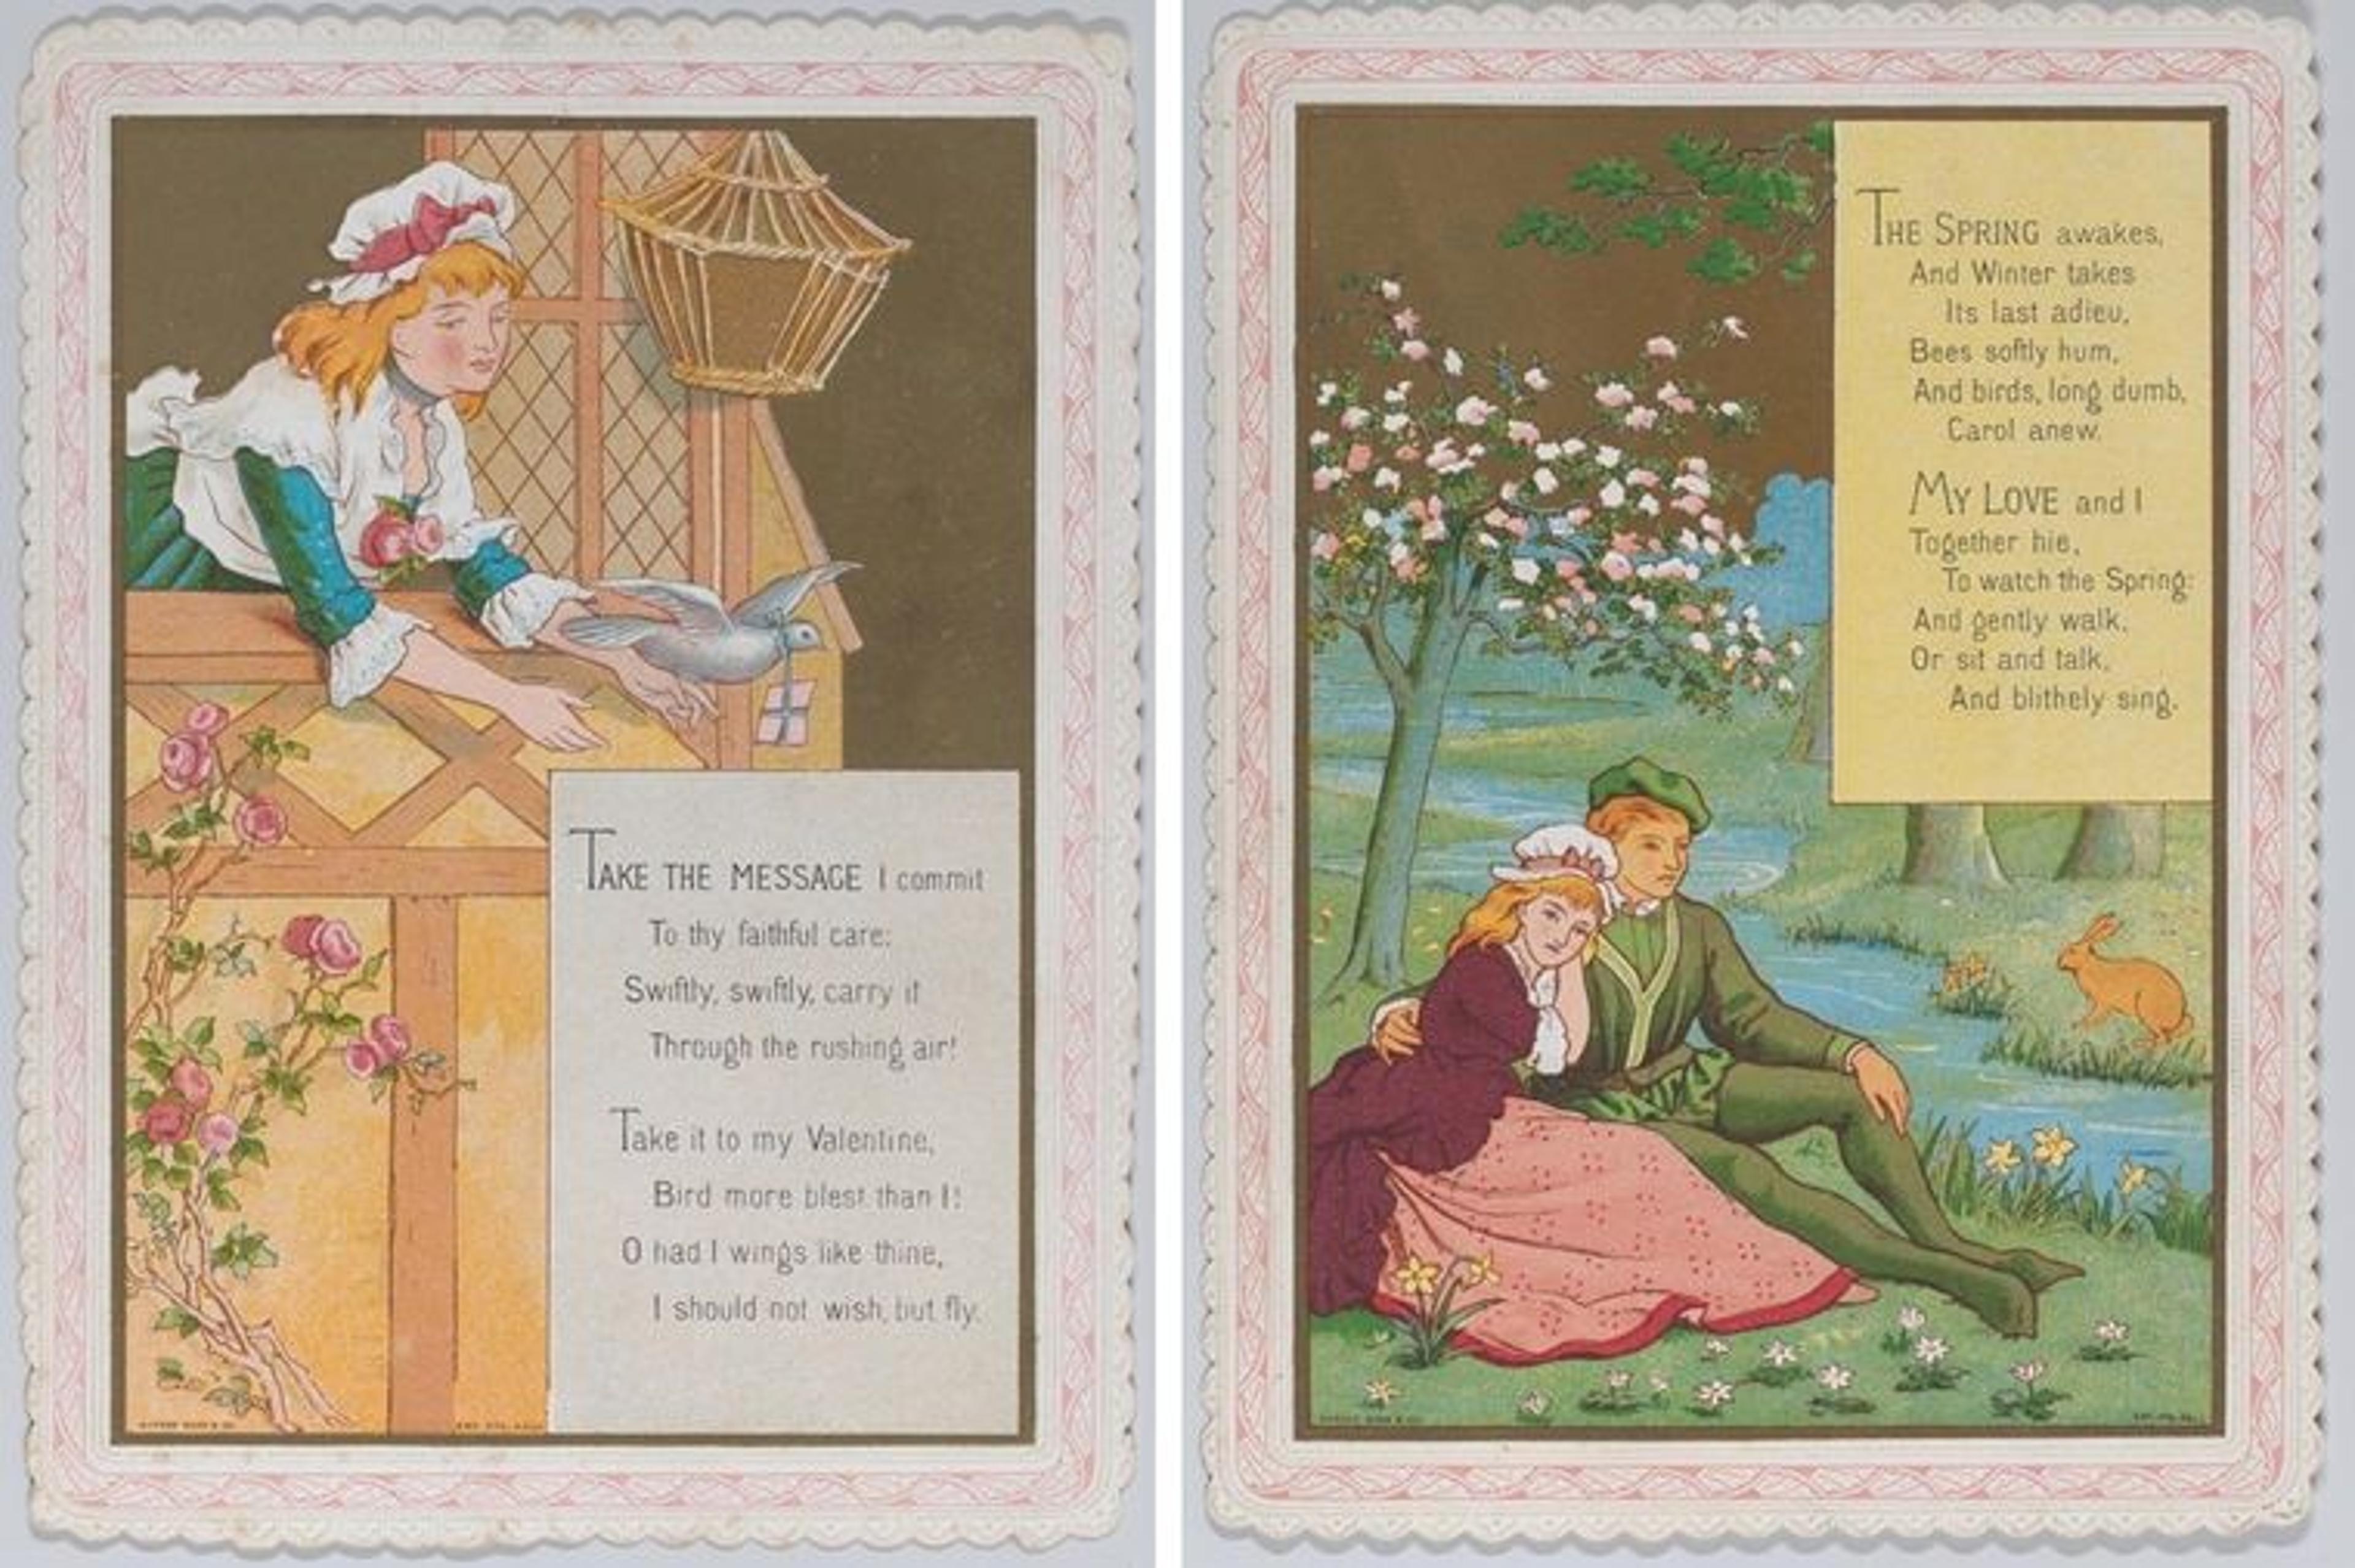 Two Kate Greenaway valentines depicting young lovers in pastoral settings, with short poems included on each